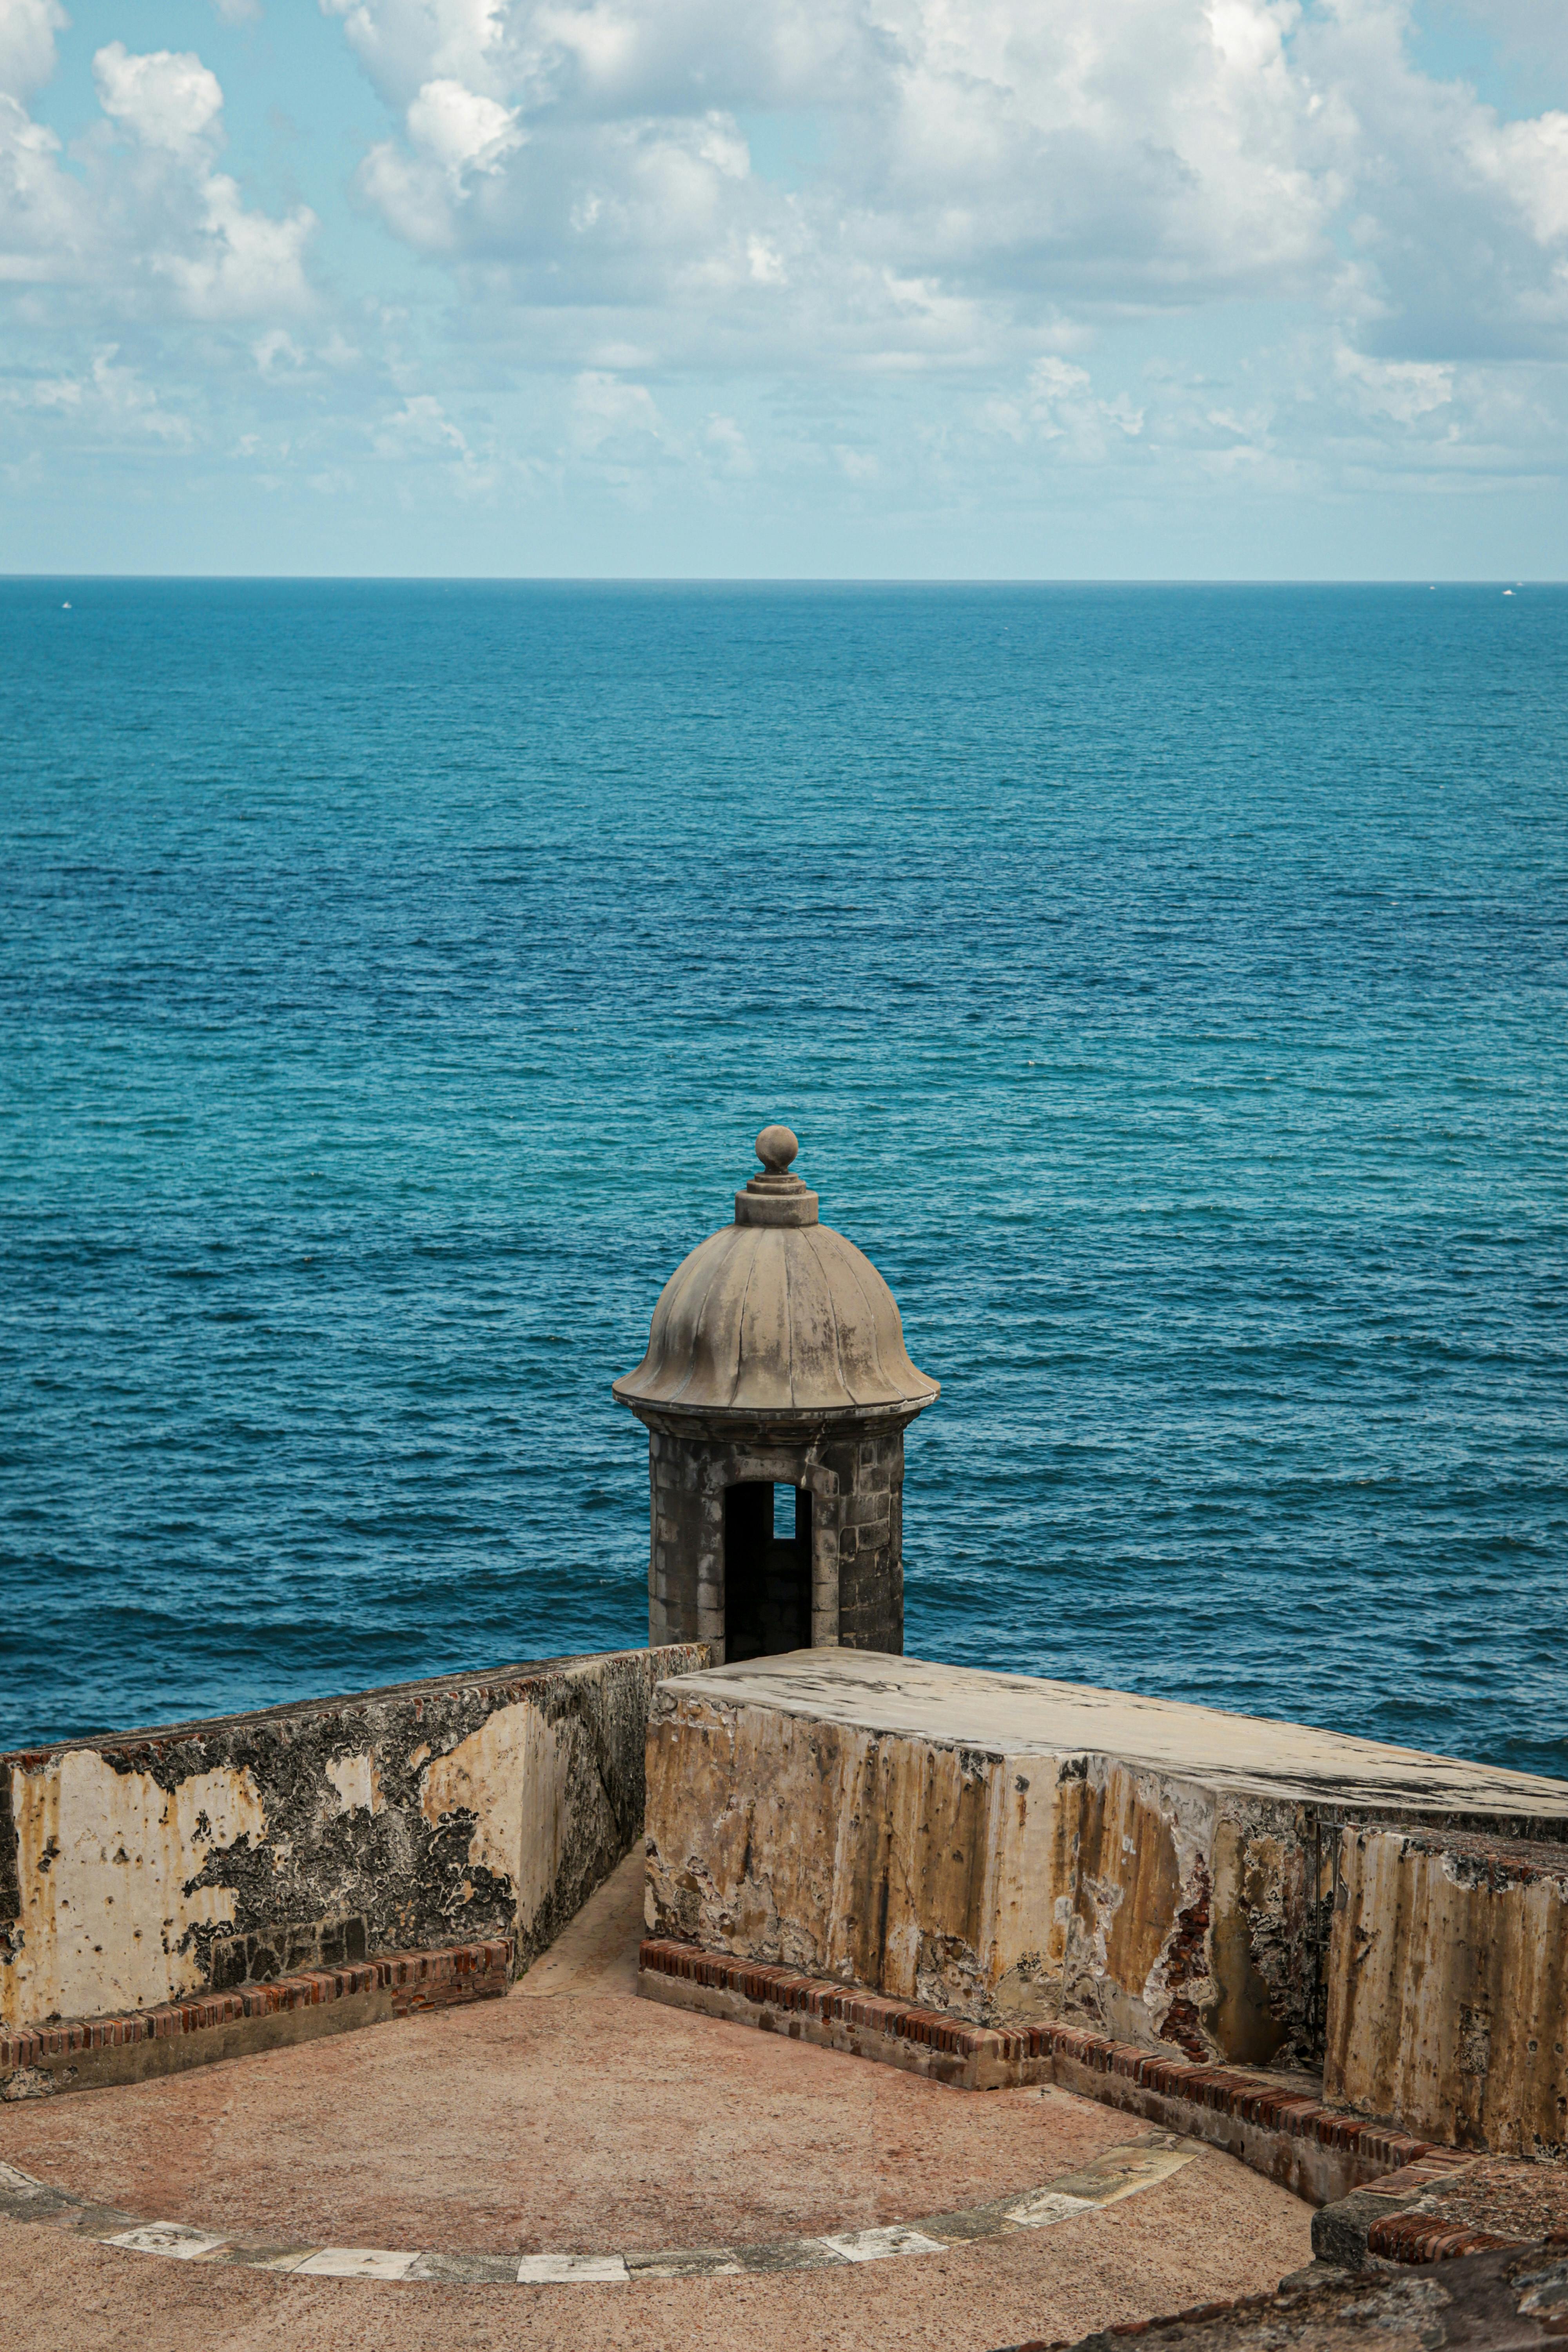 Best El Morro La Habana Royalty-Free Images, Stock Photos & Pictures